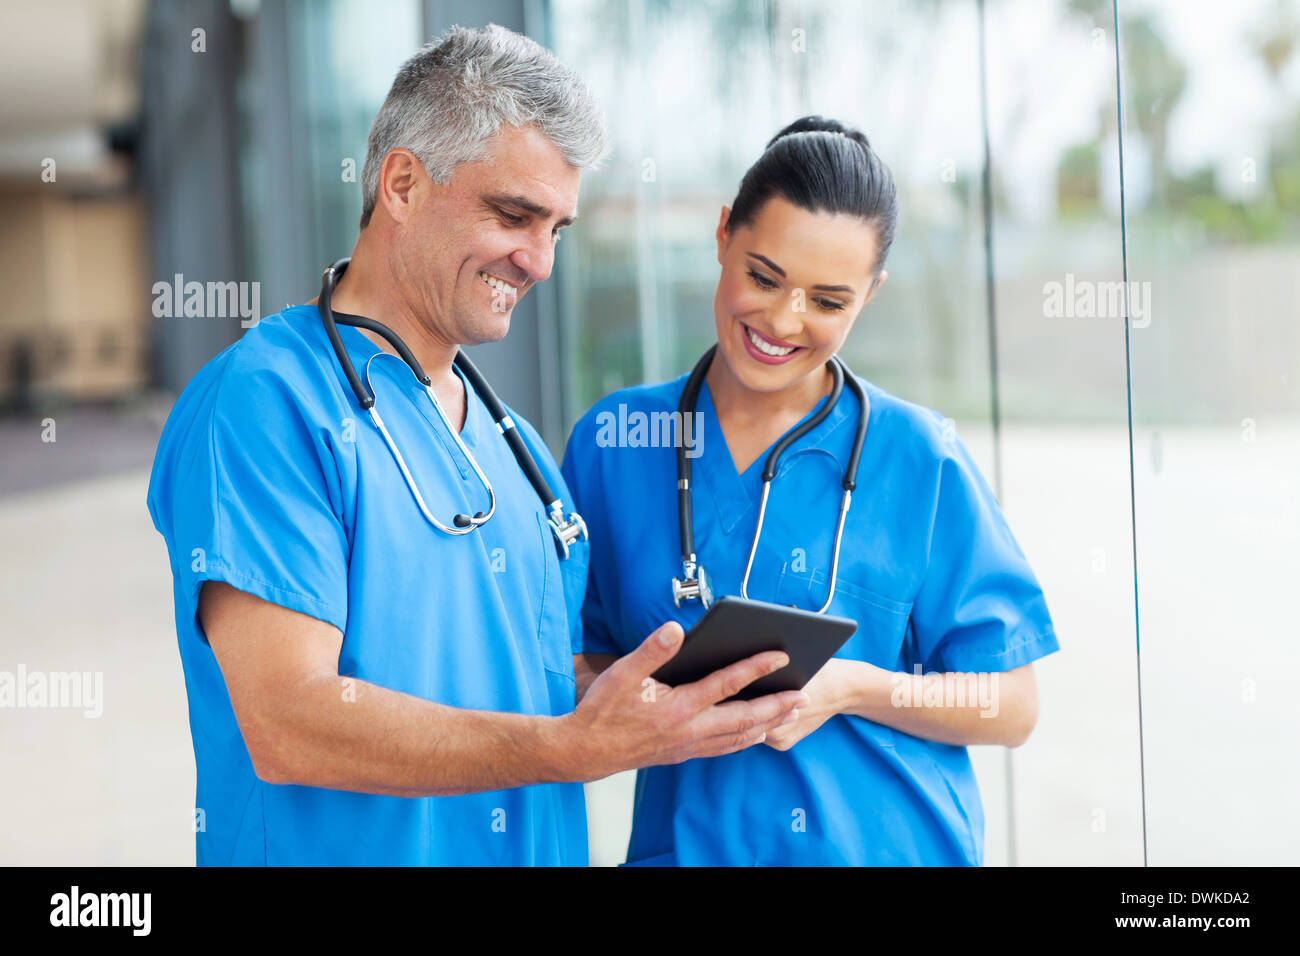 professional healthcare workers using tablet computer Stock Photo